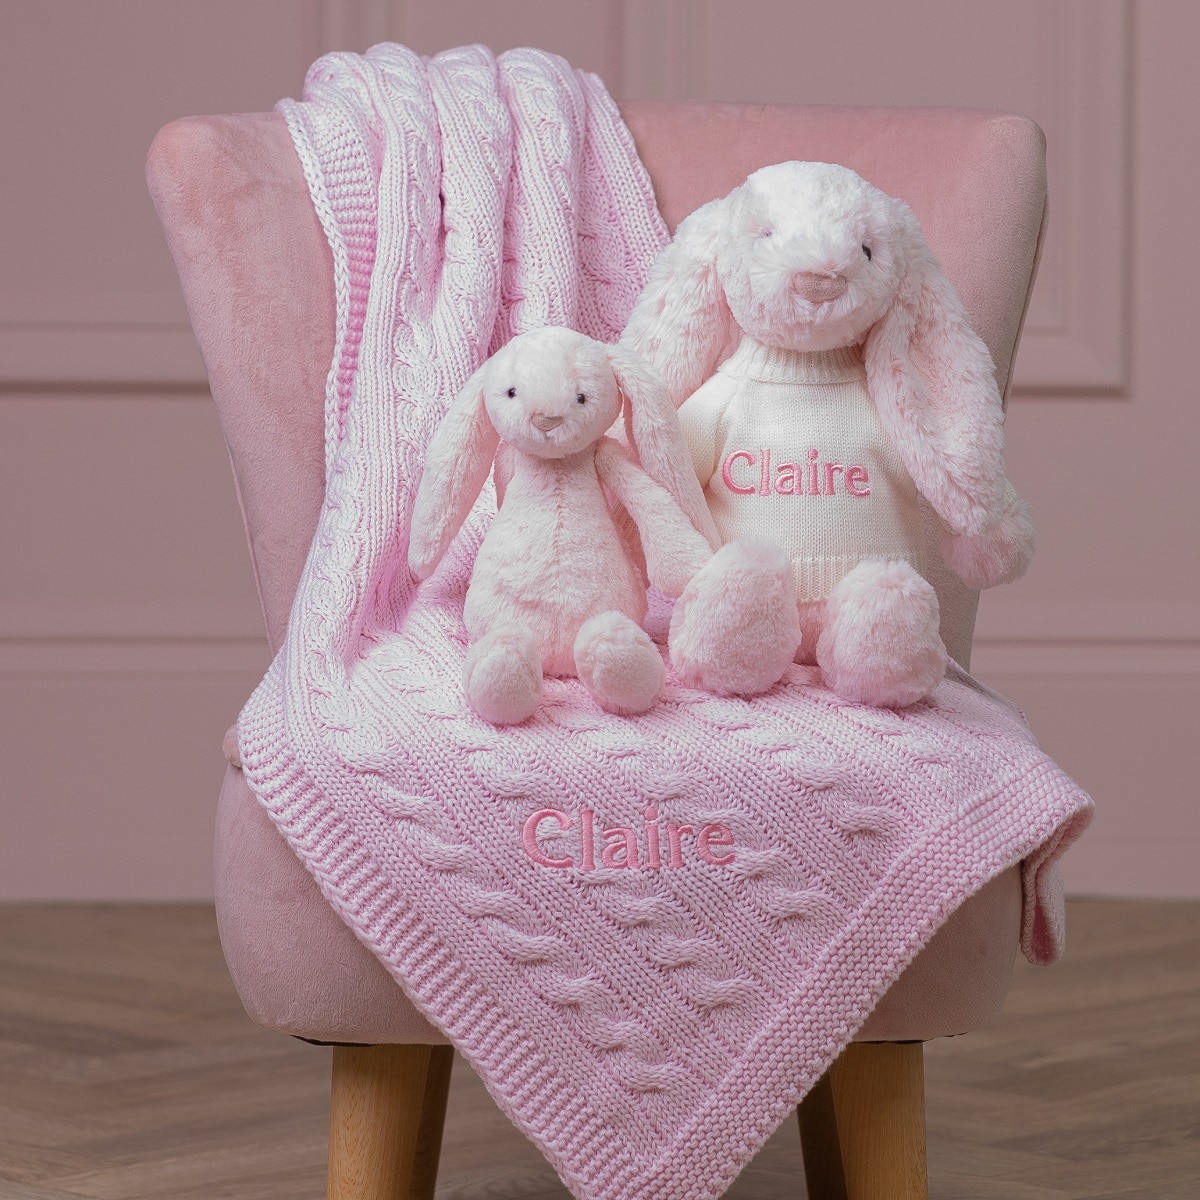 Personalised Toffee Moon luxury pale pink cable baby blanket and pale pink Jellycat bashful bunny